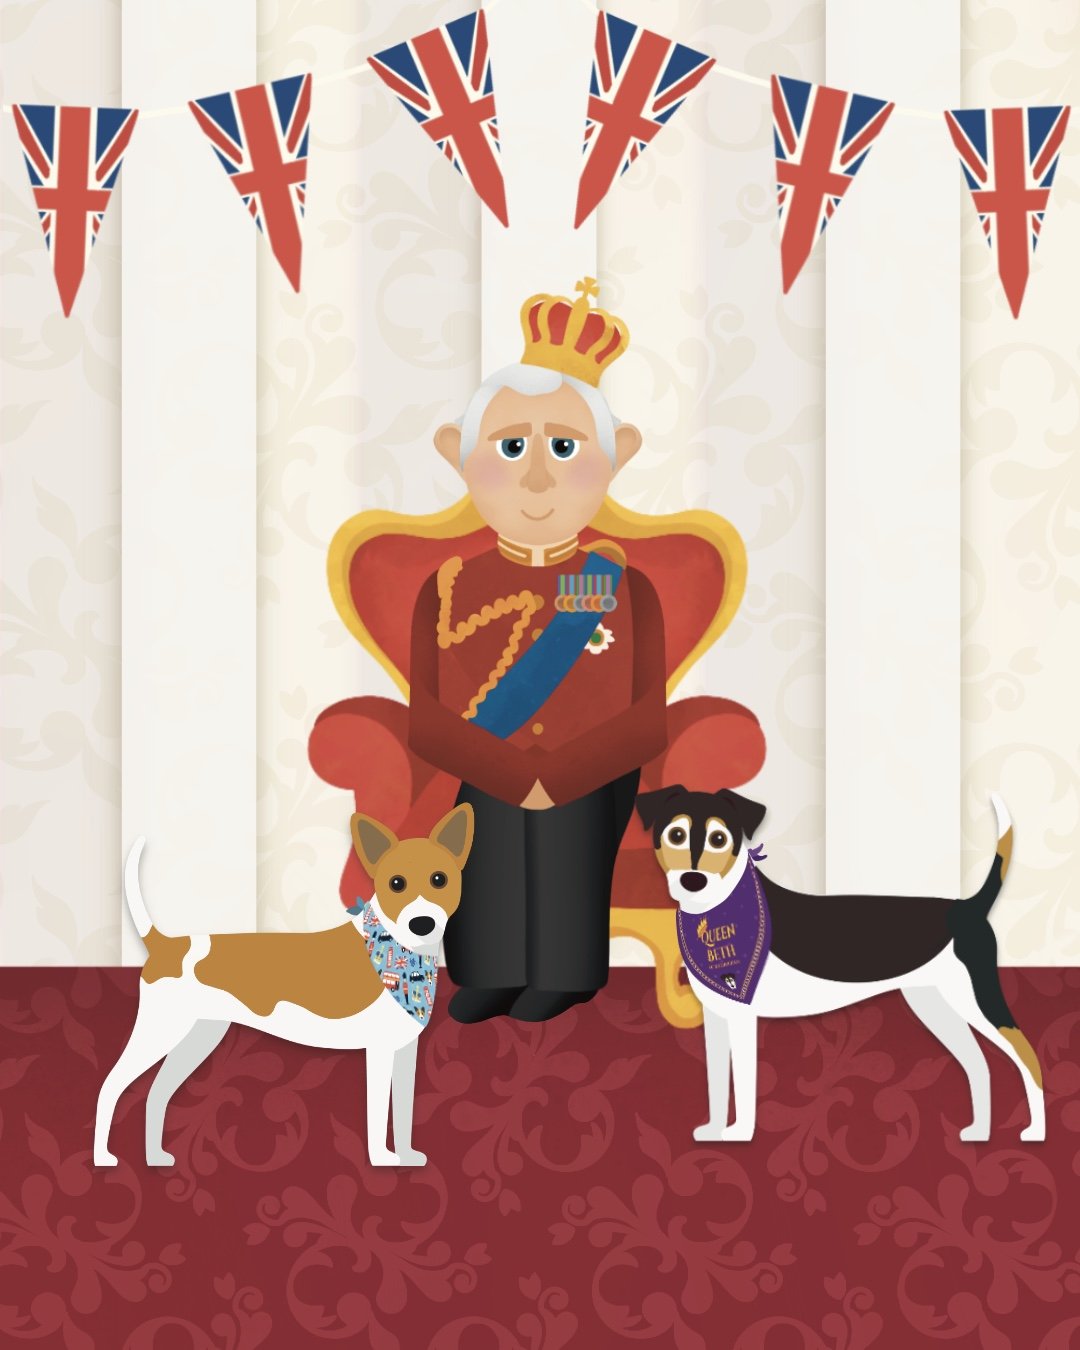 Is Your Dog the Most Regal Pup in the UK?